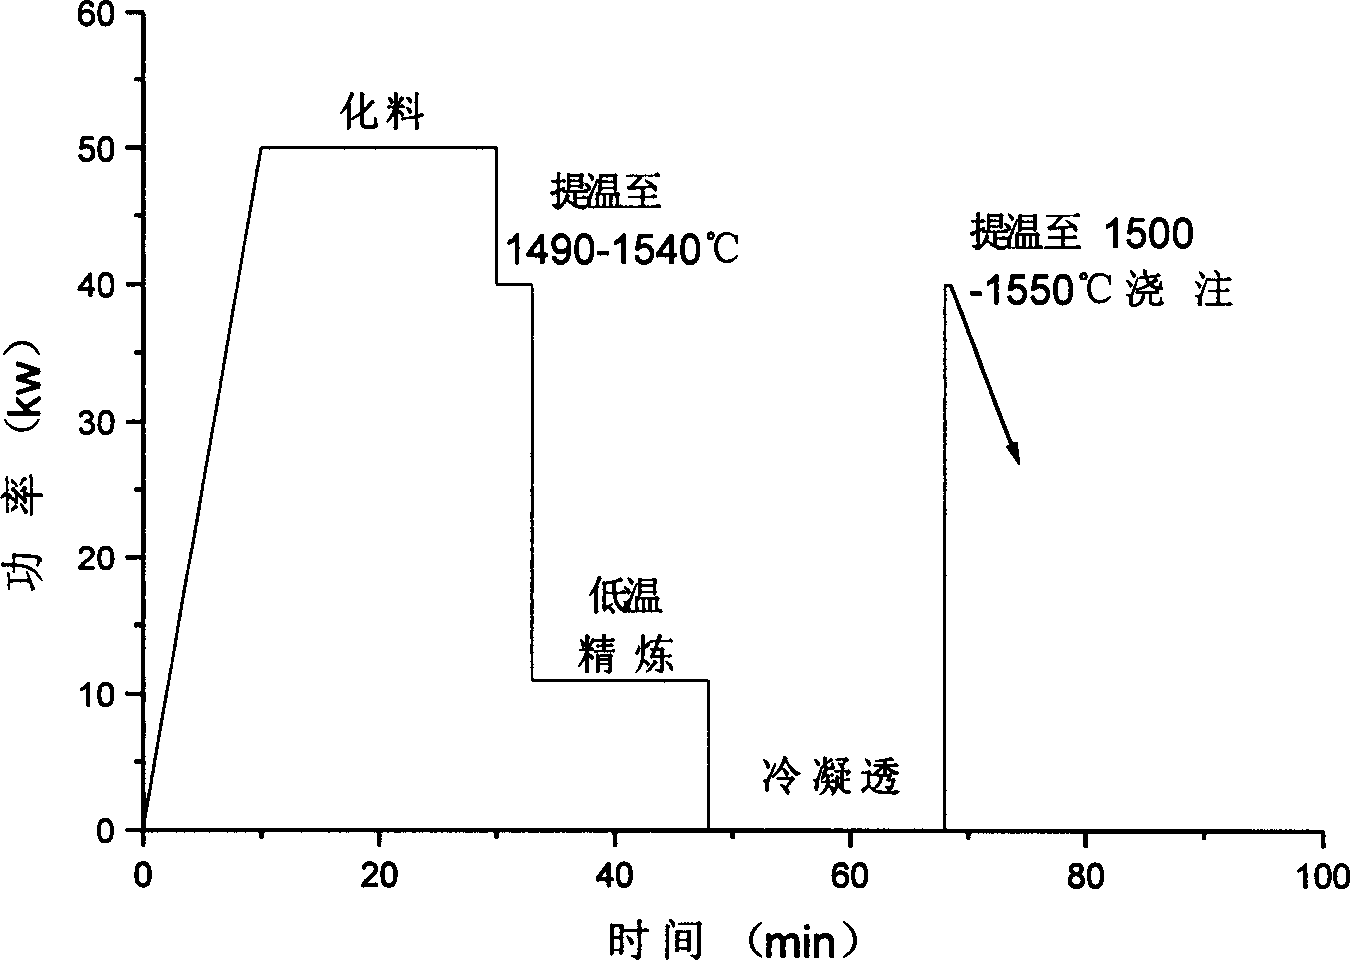 Ultrapure smelting process for nickel-base high-temperature alloy